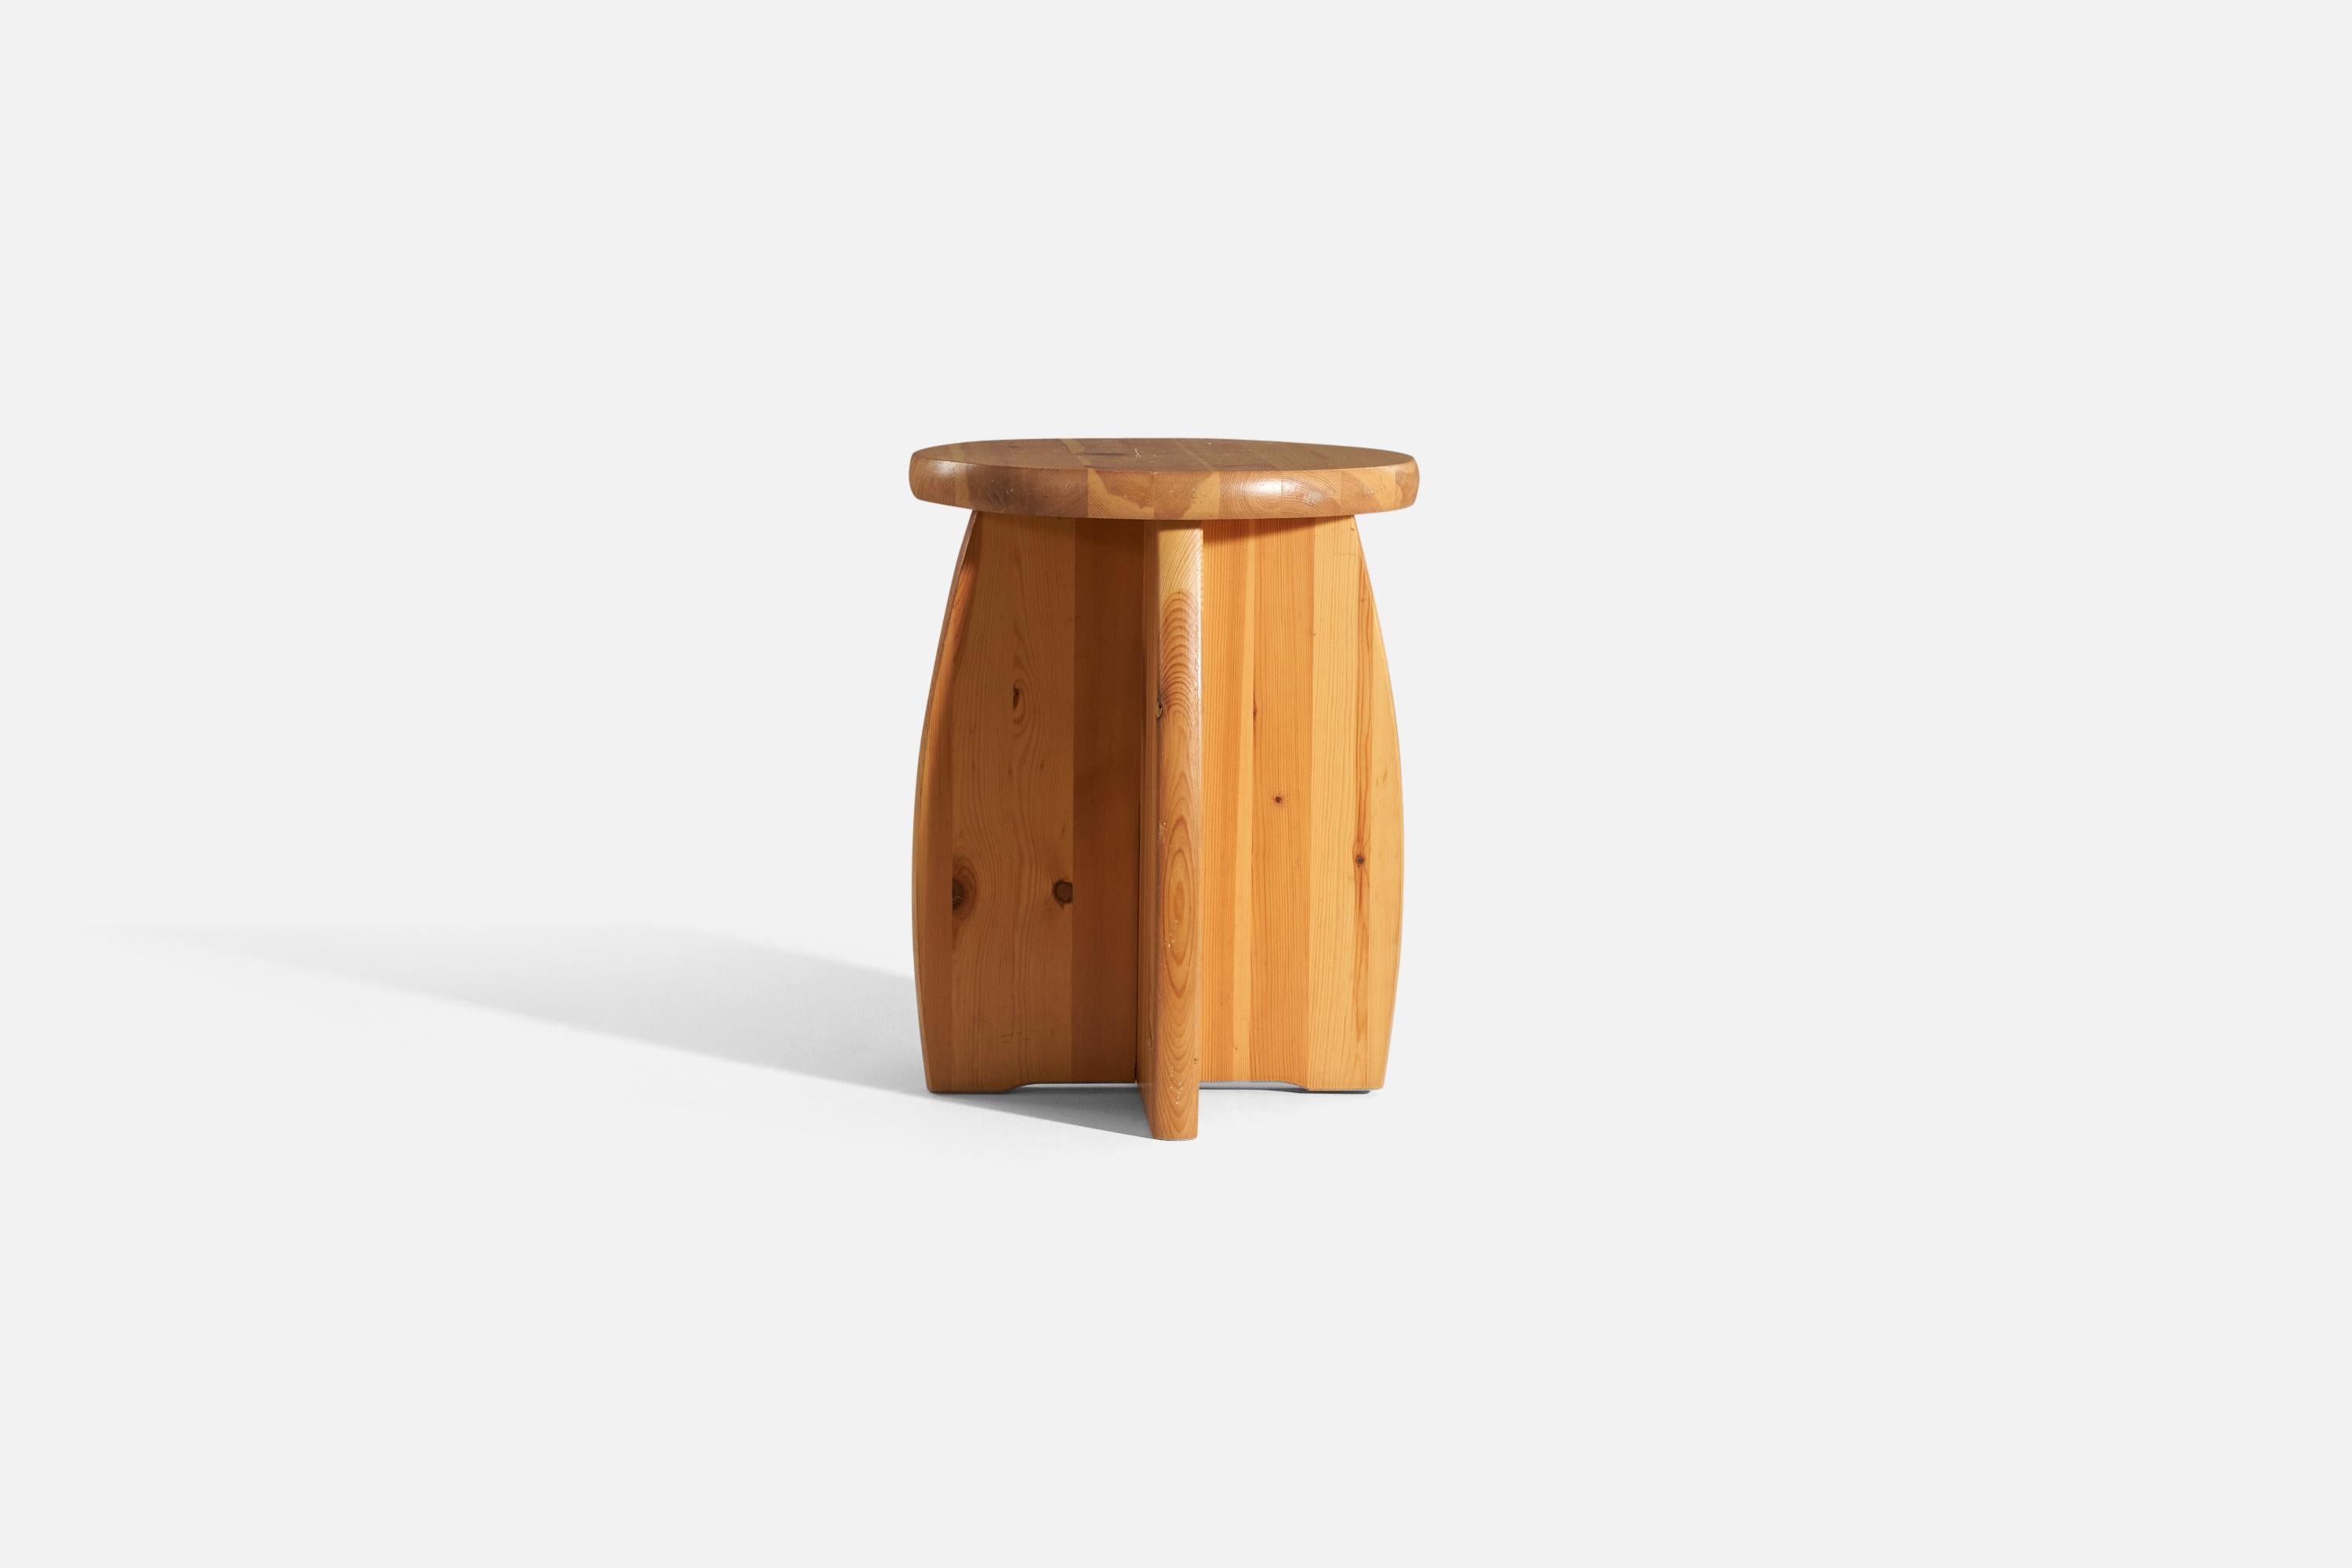 A solid pine stool produced by a Swedish designer, Sweden, 1970s.